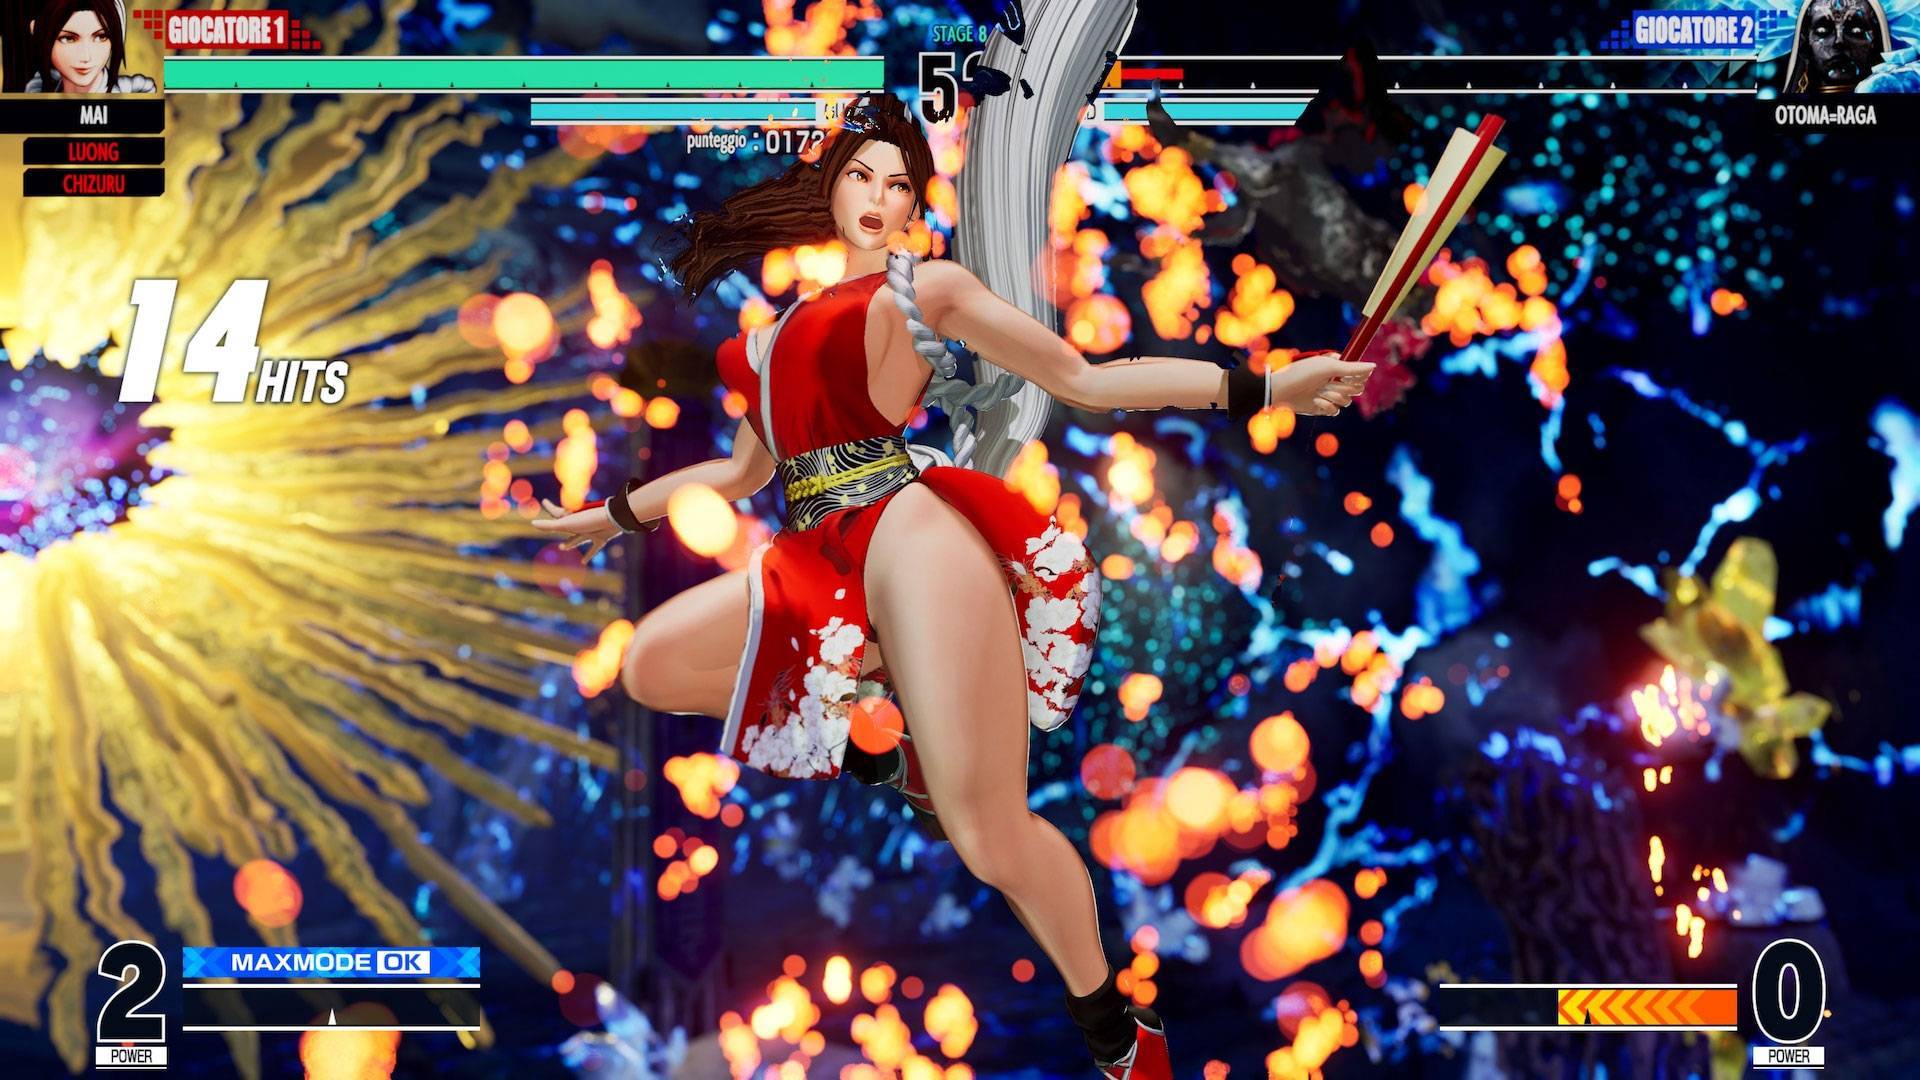 The King of Fighters XV, Second Season DLC, Xbox Series X, Review, Fighting Game, Mai Shiranui, Female Protagonist, NoobFeed